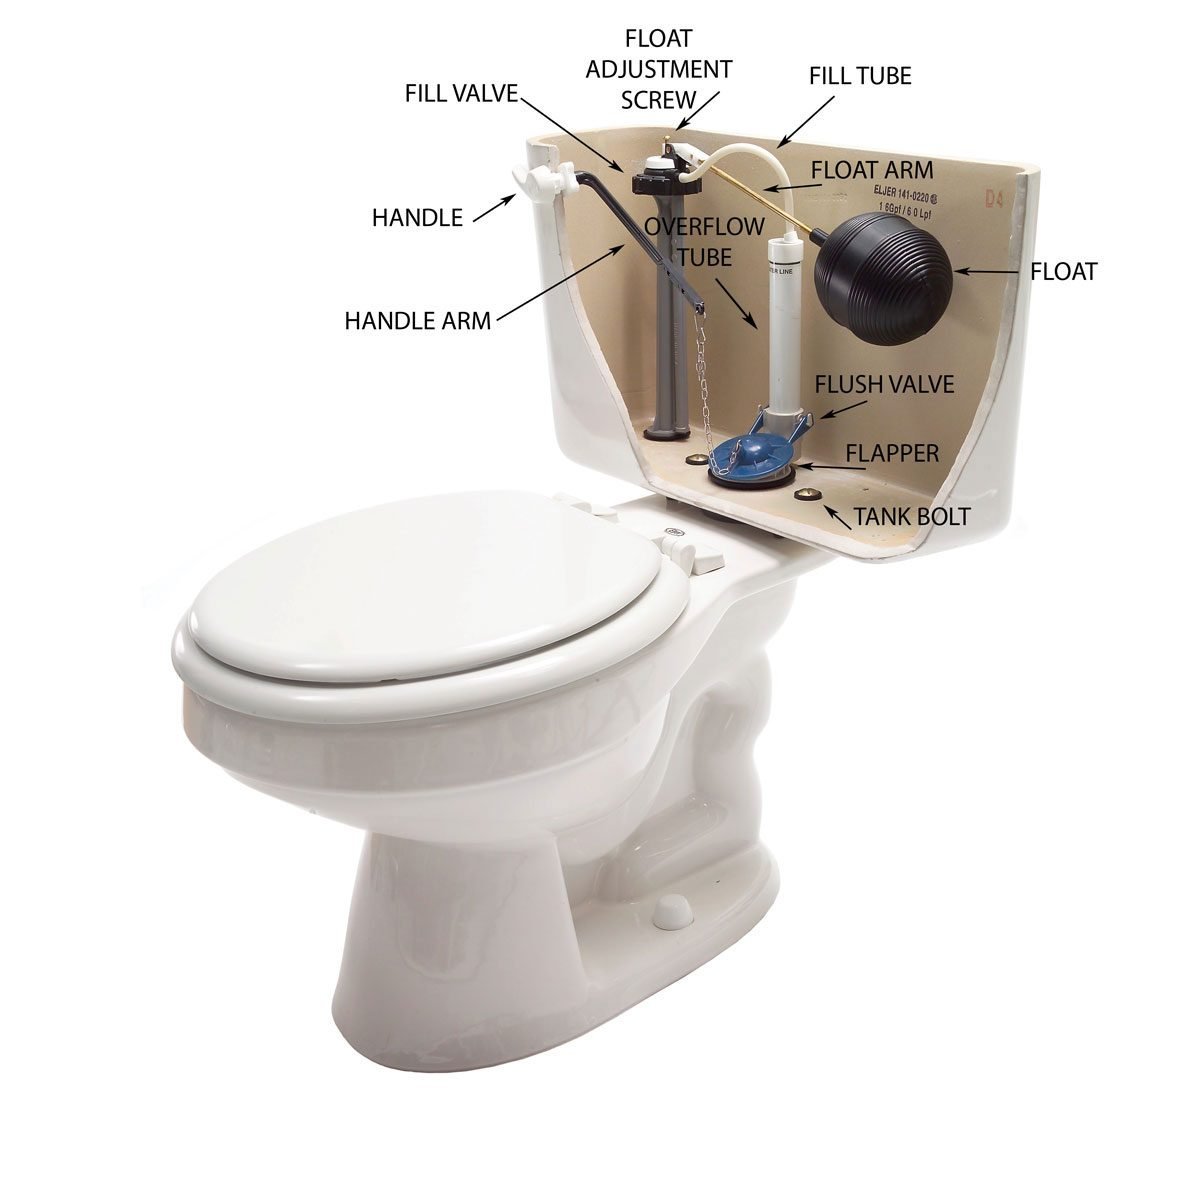 Toilet Parts: What They Are and Common Fixes (DIY)